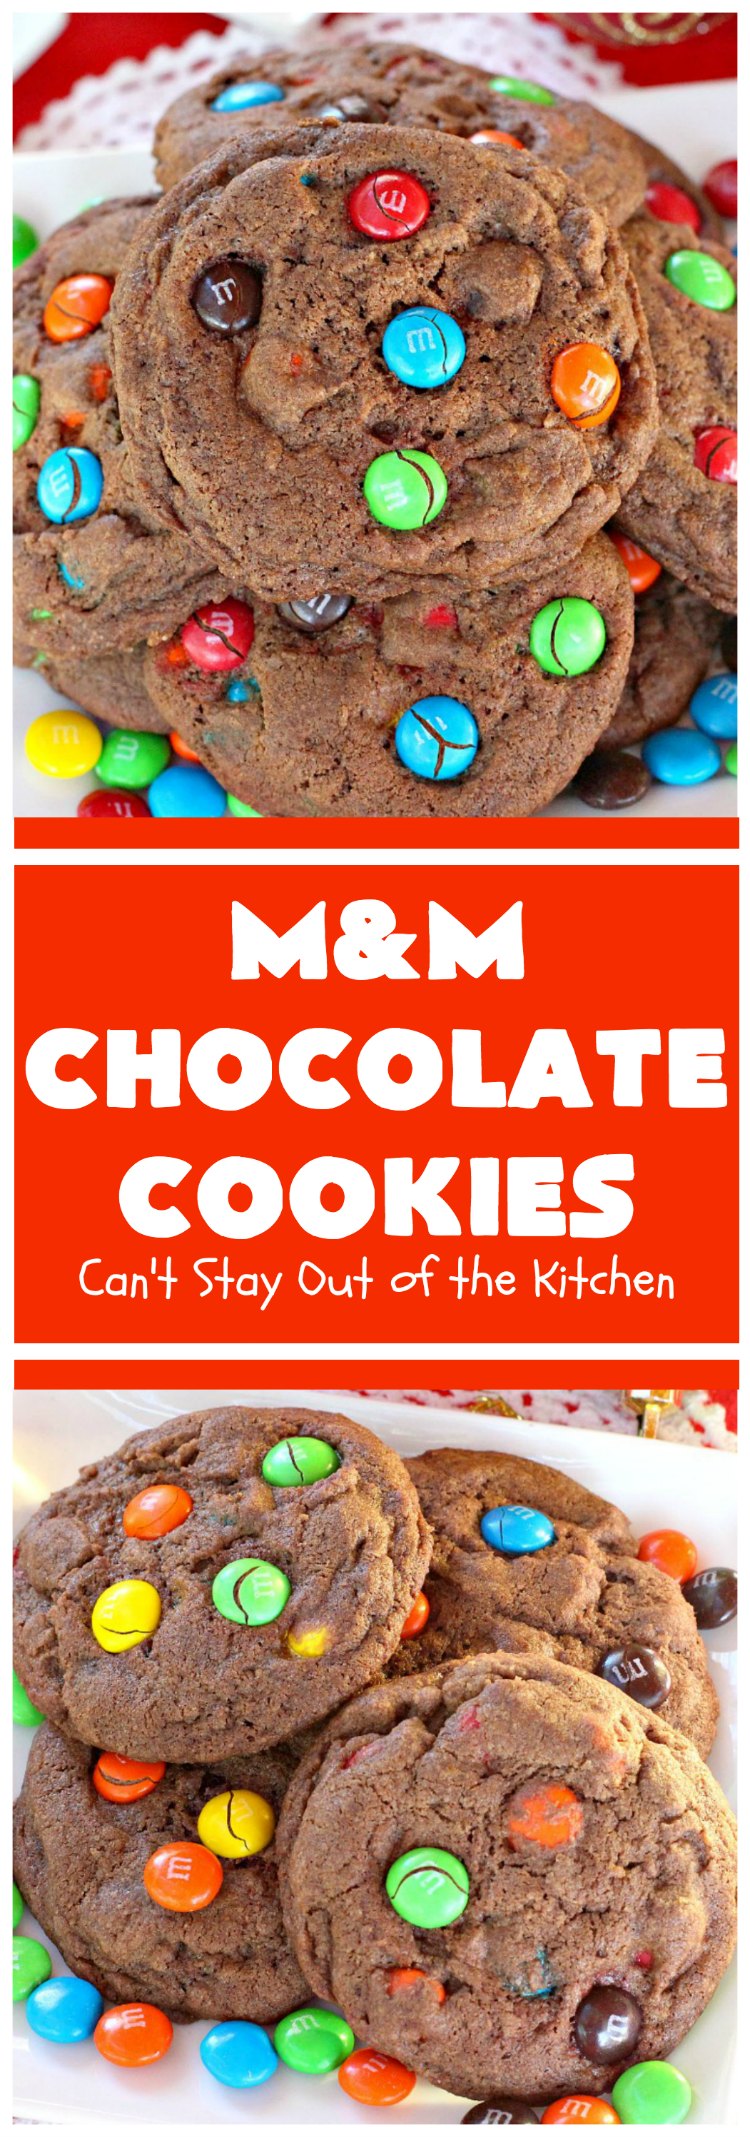 M&M Chocolate Cookies | Can't Stay Out of the Kitchen | these fantastic #chocolate #cookies are so festive and beautiful for the #holidays. They're double loaded with chocolate & #MMs. This #dessert is absolutely a chocolate lover's delight! #ChristmasCookieExchange #HolidayBaking #HolidayDessert #baking #ChocolateDessert #MMDessert #MMChocolateCookies